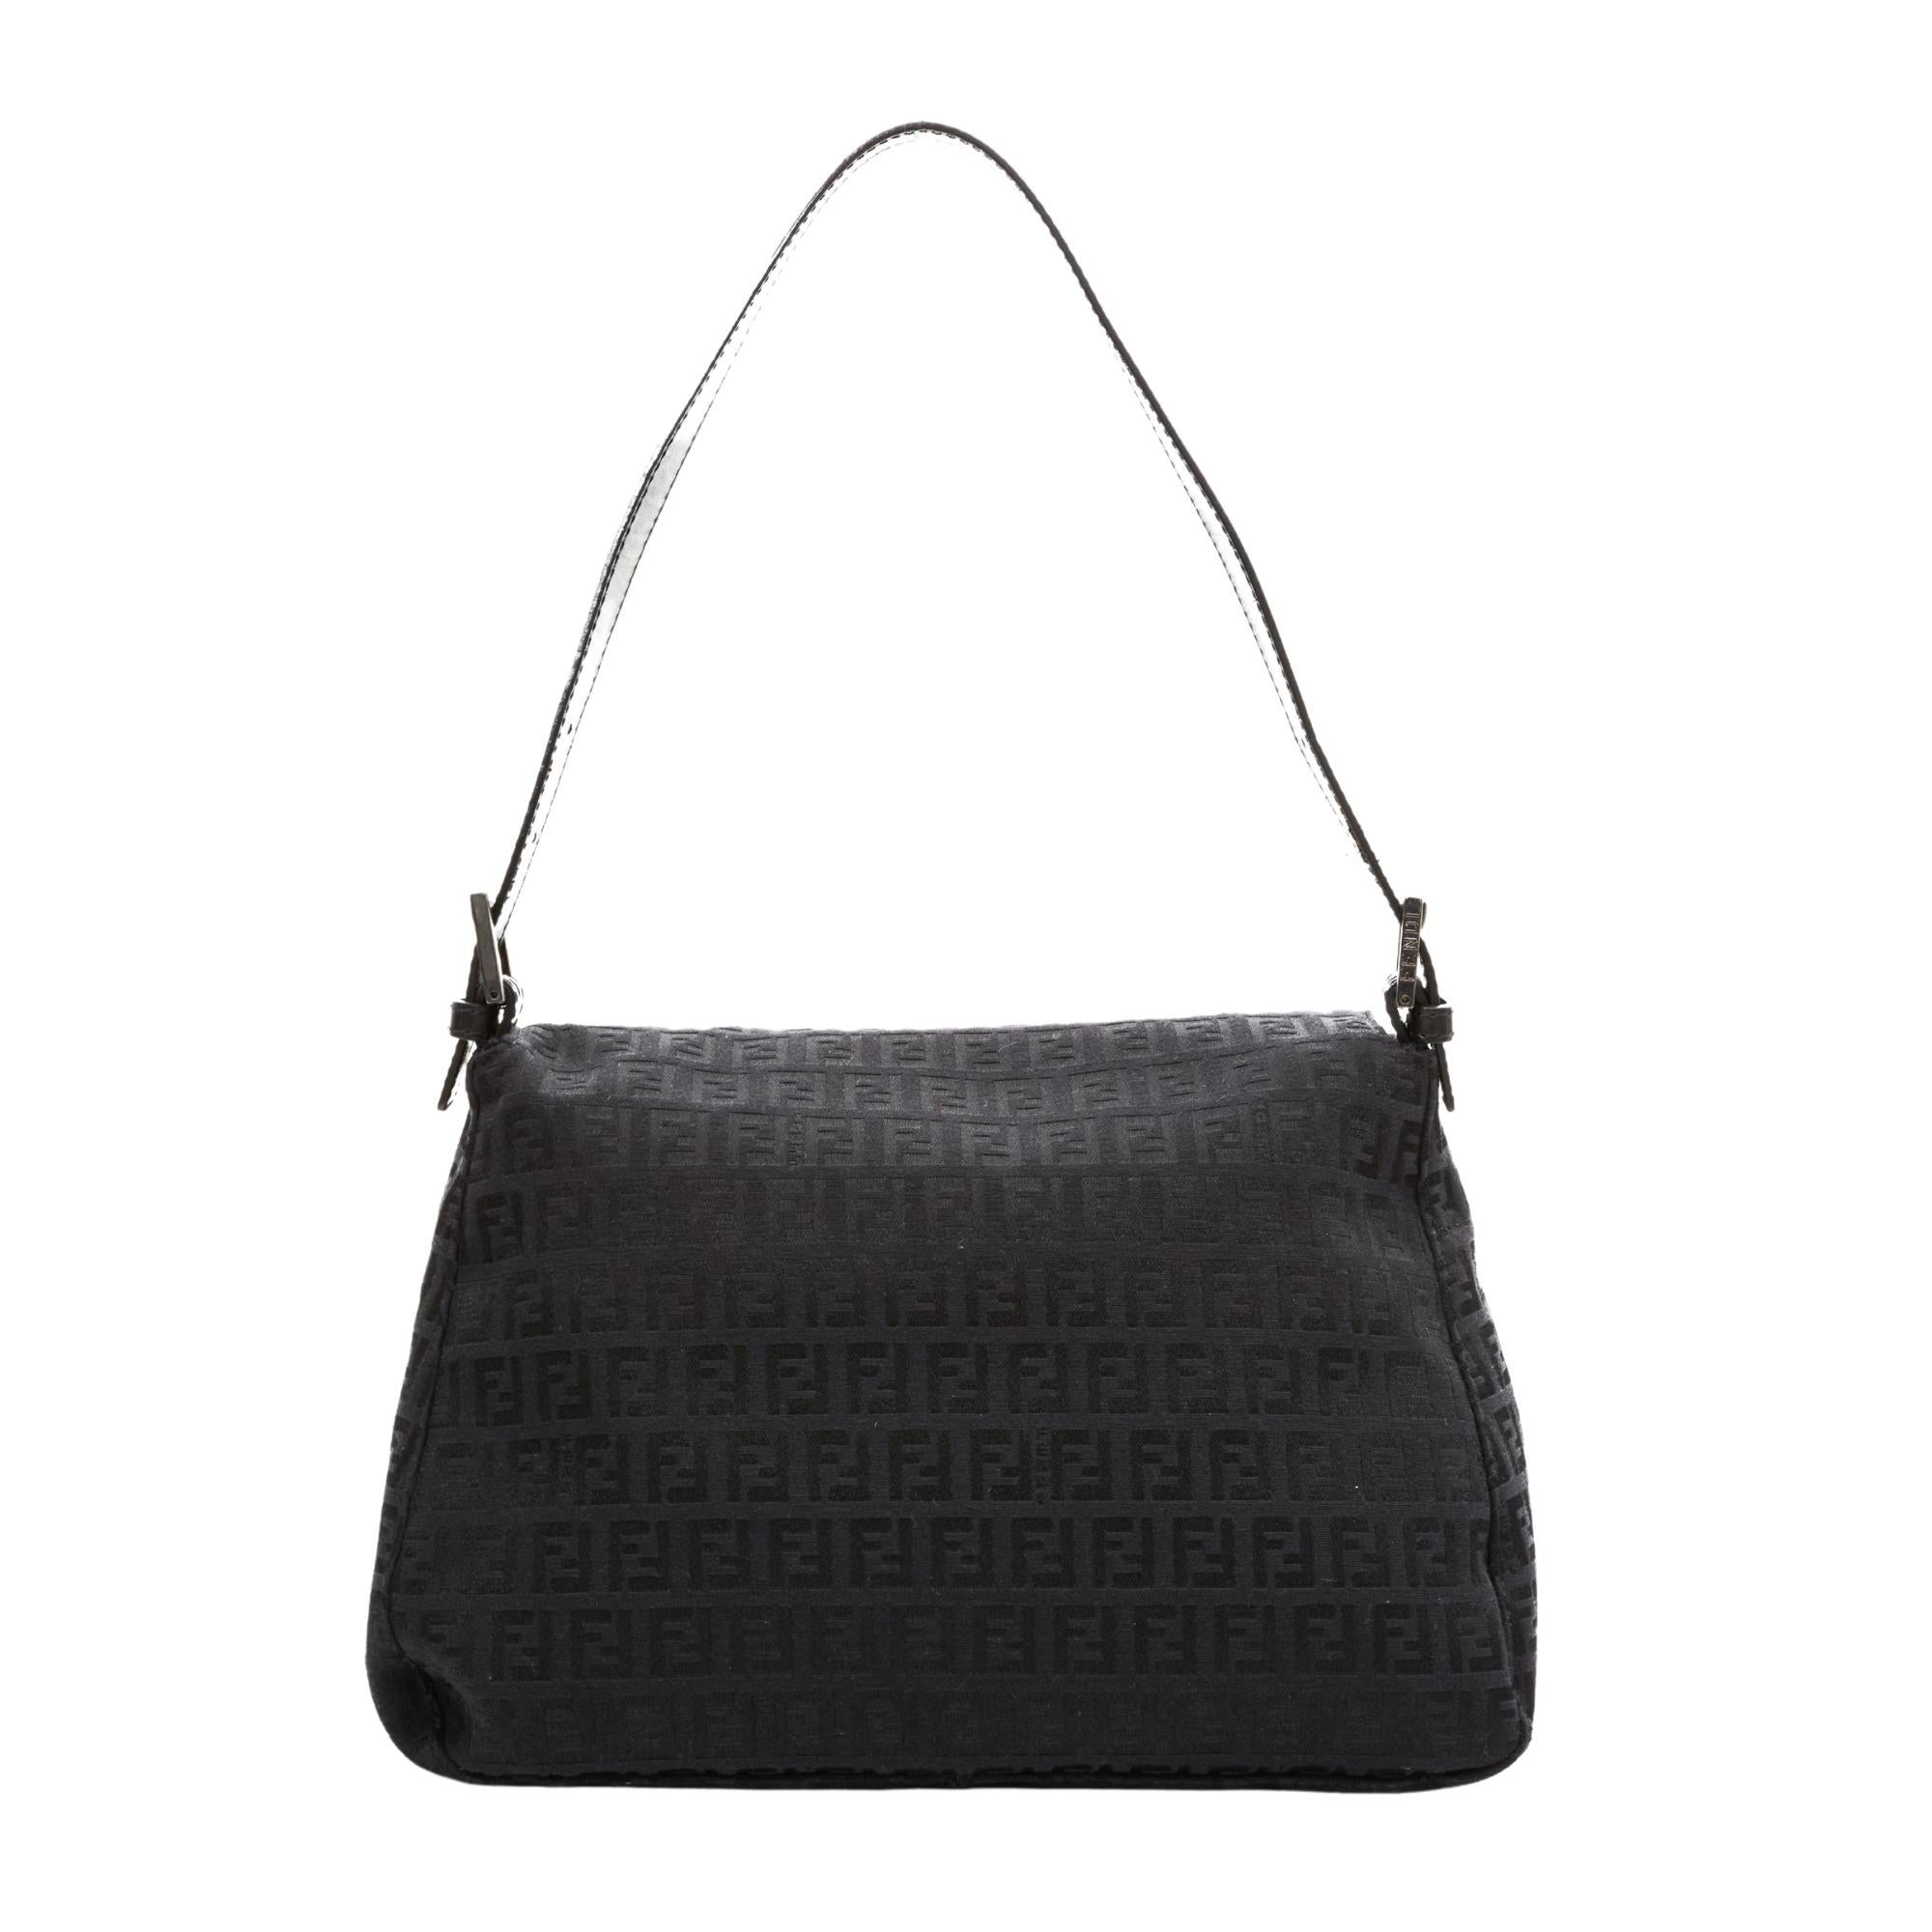 This Mama baguette is made with black canvas with black Fendi Zuccino embossing throughout. The bag features an adjustable looping leather strap, gunmetal buckle links for the top strap and a front leather strap with a gunmetal FF logo. This flap